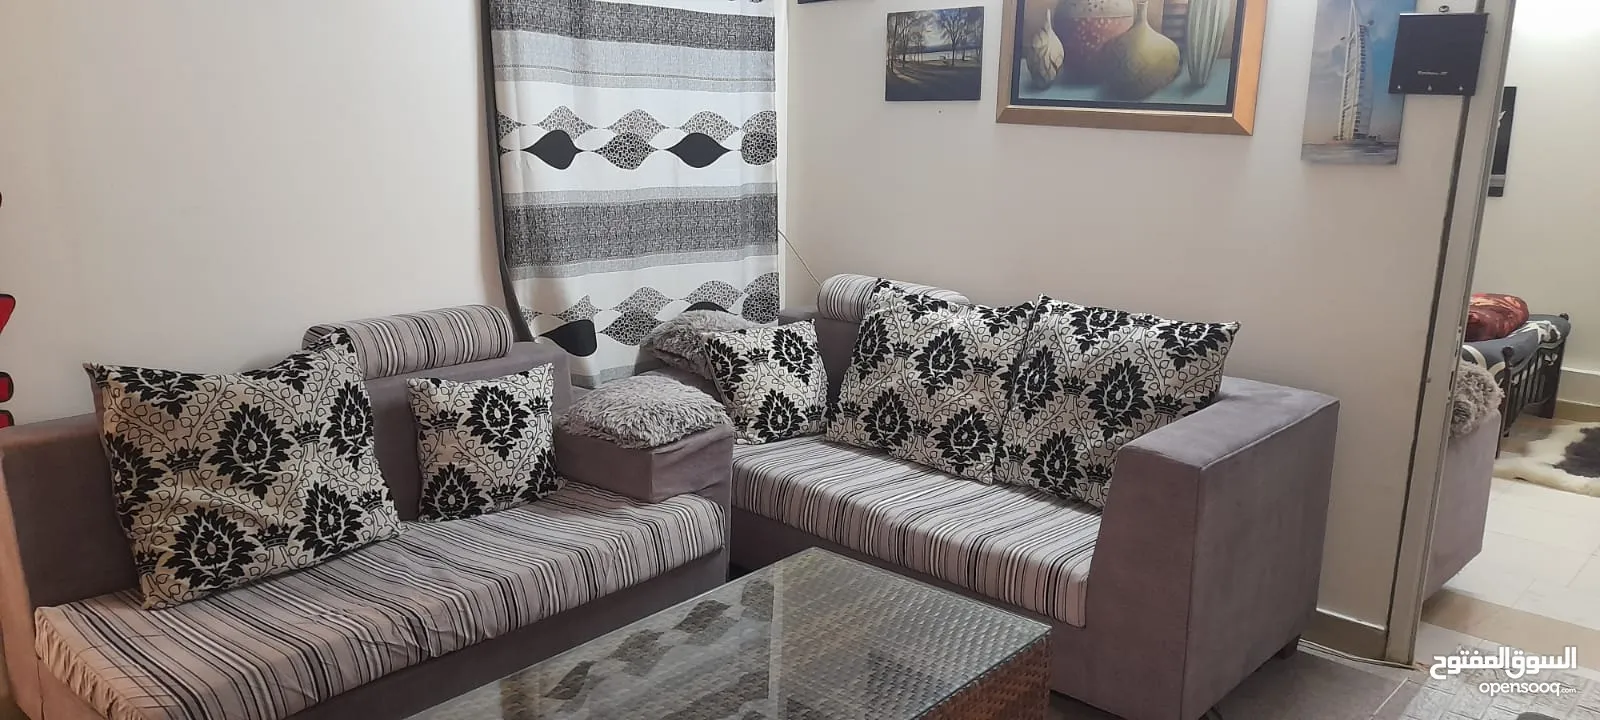 FURNISHED HOUSE AL AIN DAILY